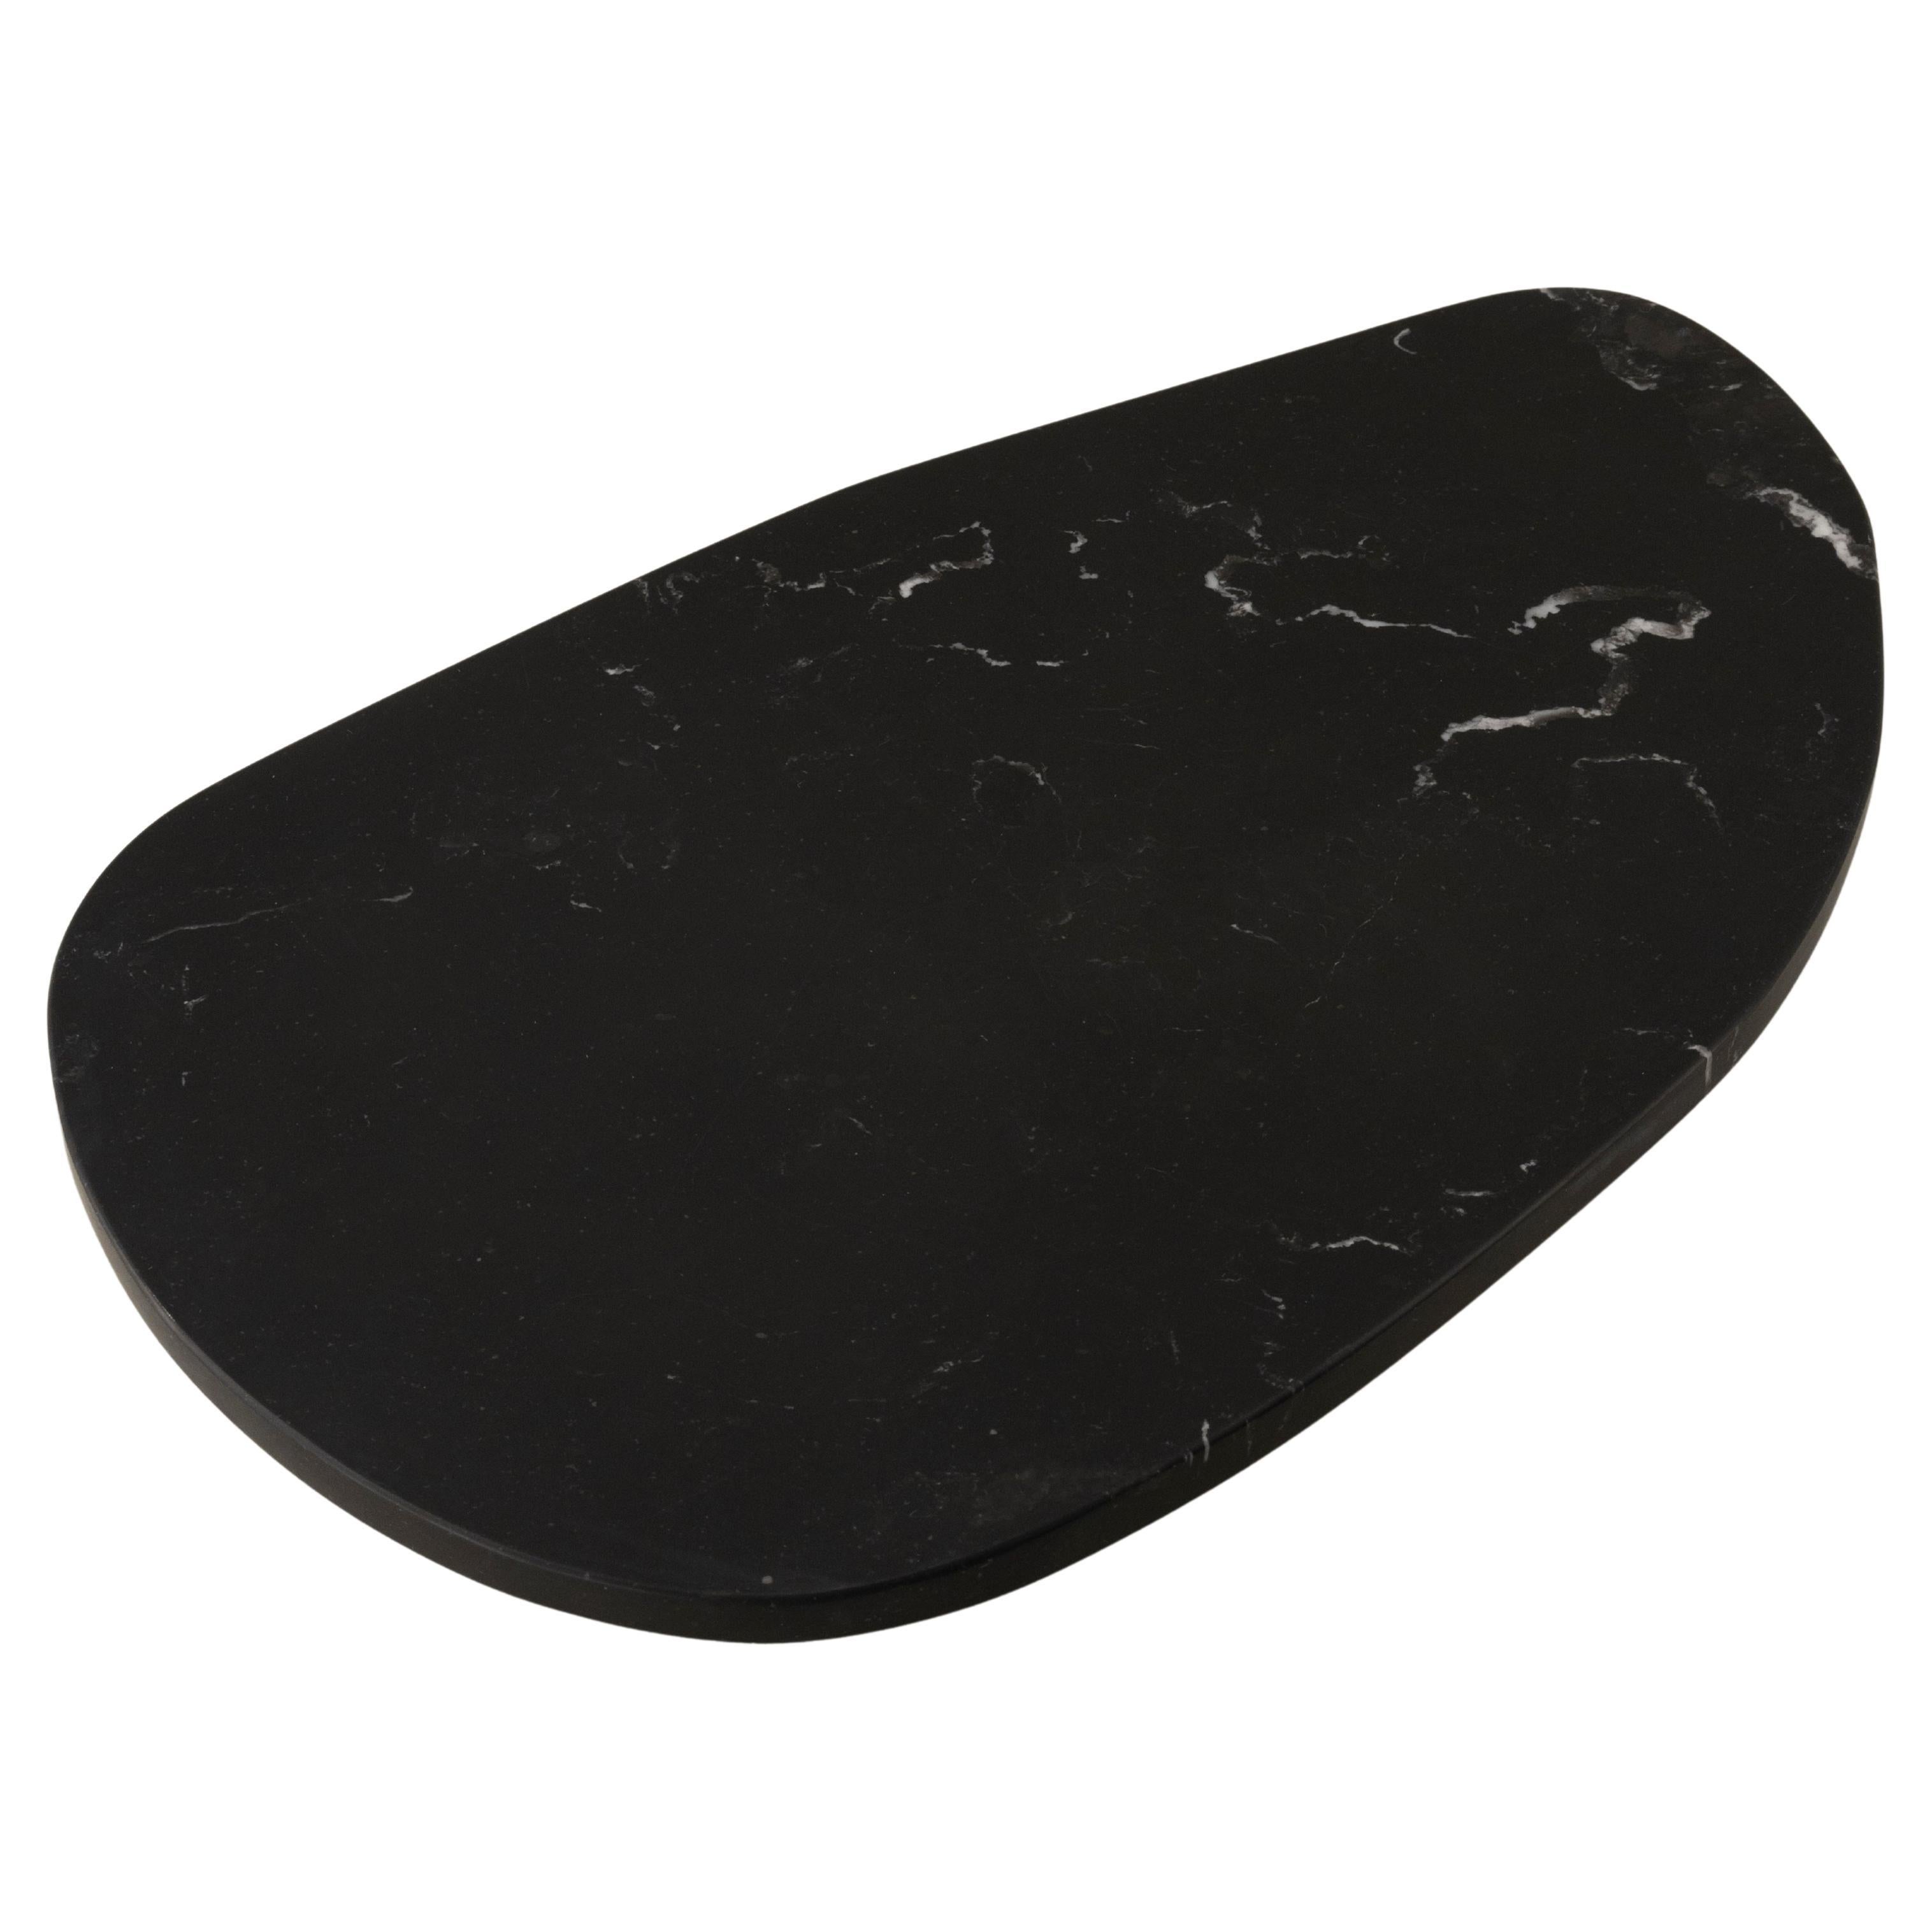 This handmade marble tray from Casa Almasi is a stunning work of art crafted by skilled Mexican artisans. Handcrafted marble is a timeless art form that involves using traditional techniques to shape, polish, and finish natural stone into beautiful